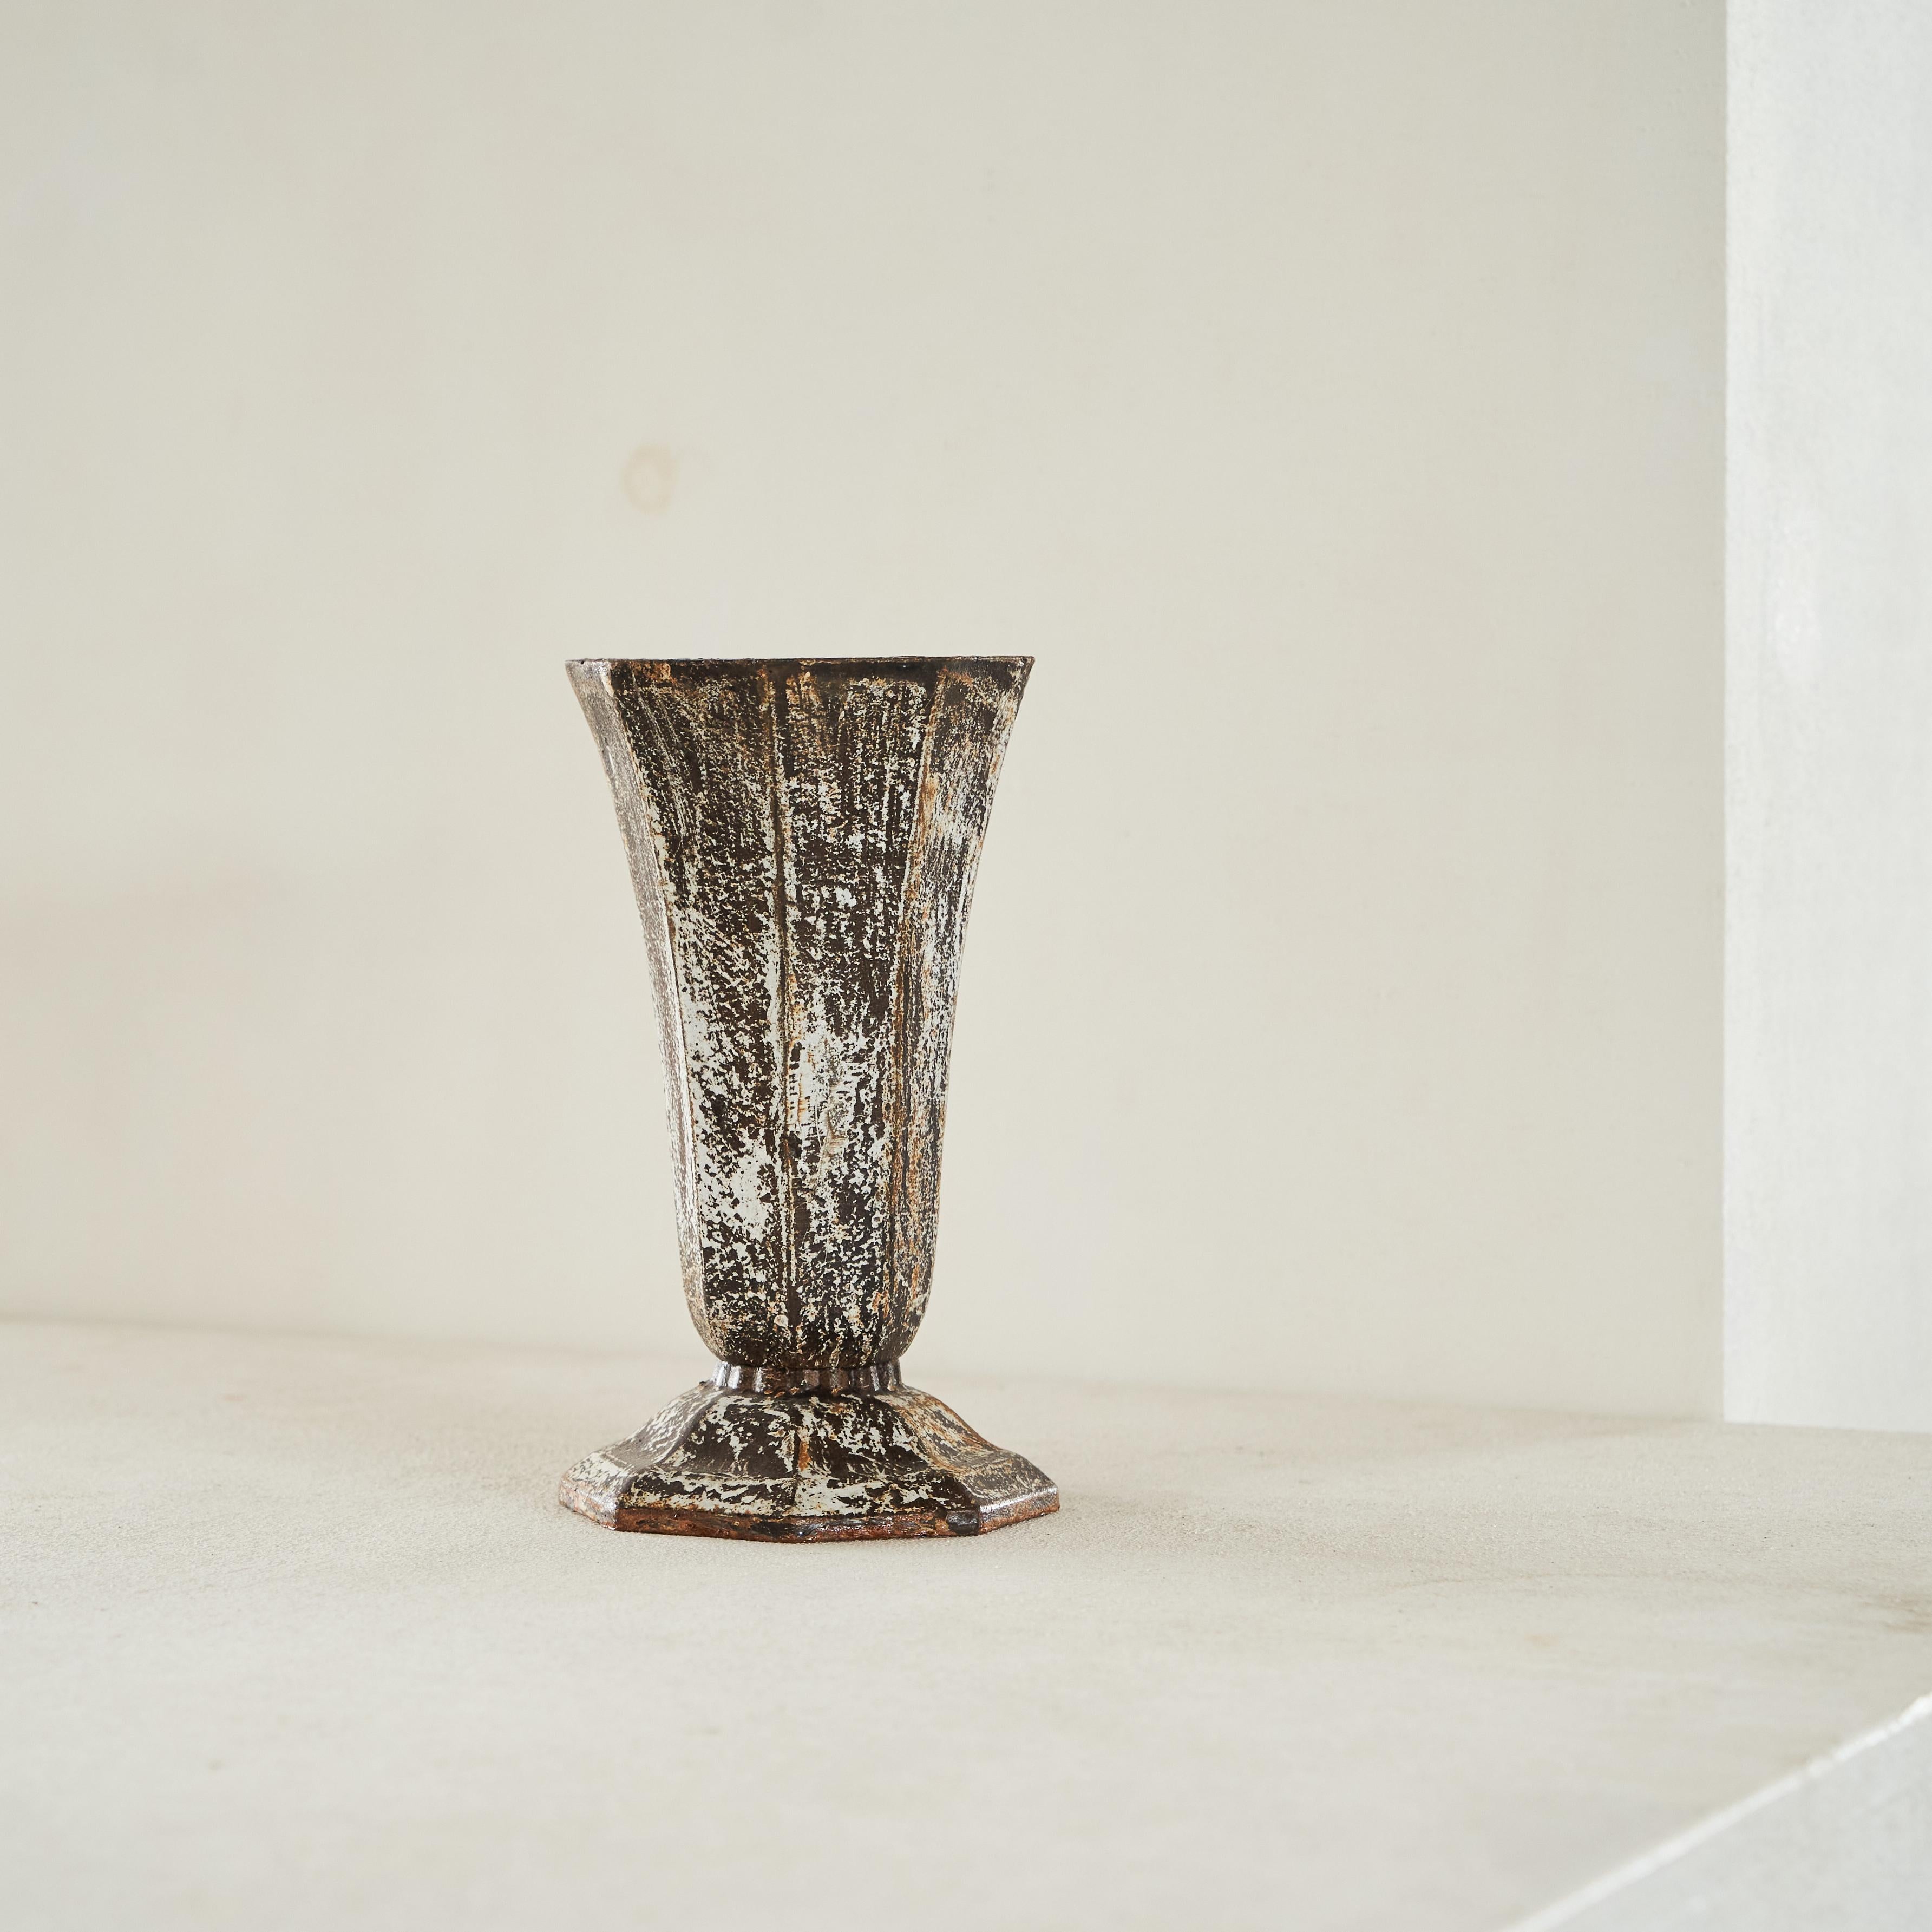 Art Deco Vase in Patinated an Rusted Metal, Europe, 1930s.

This is a wonderful and richly patinated art deco vase in cast iron. Beautifully weathered and patinated over time - a true wabi sabi piece. Great on its own, but also wonderful with some